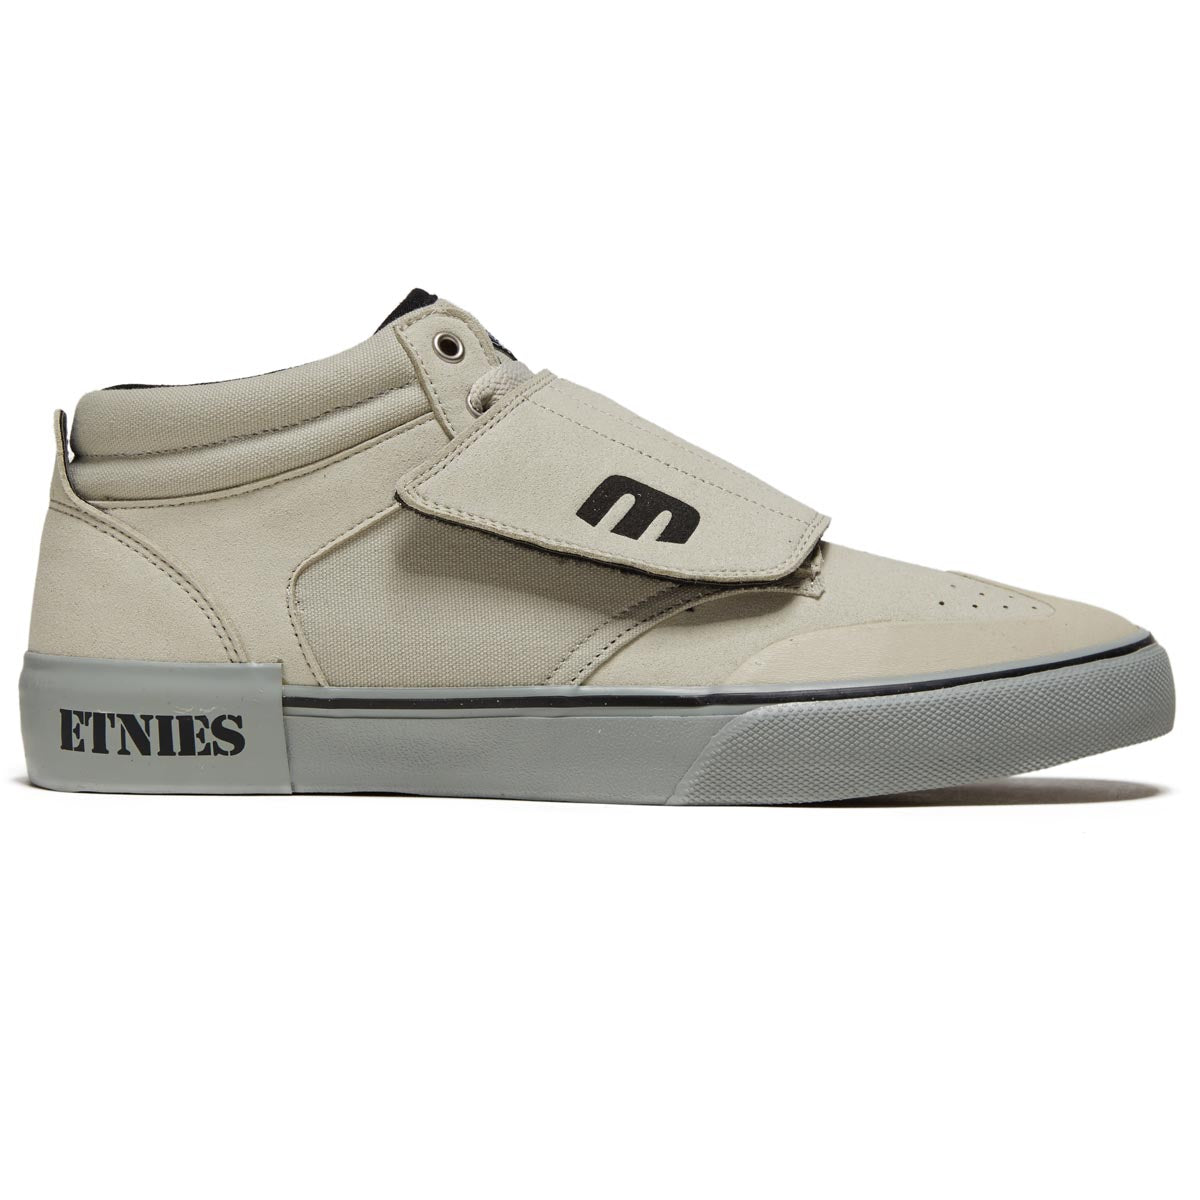 Etnies Andy Anderson Shoes - White/Grey image 1